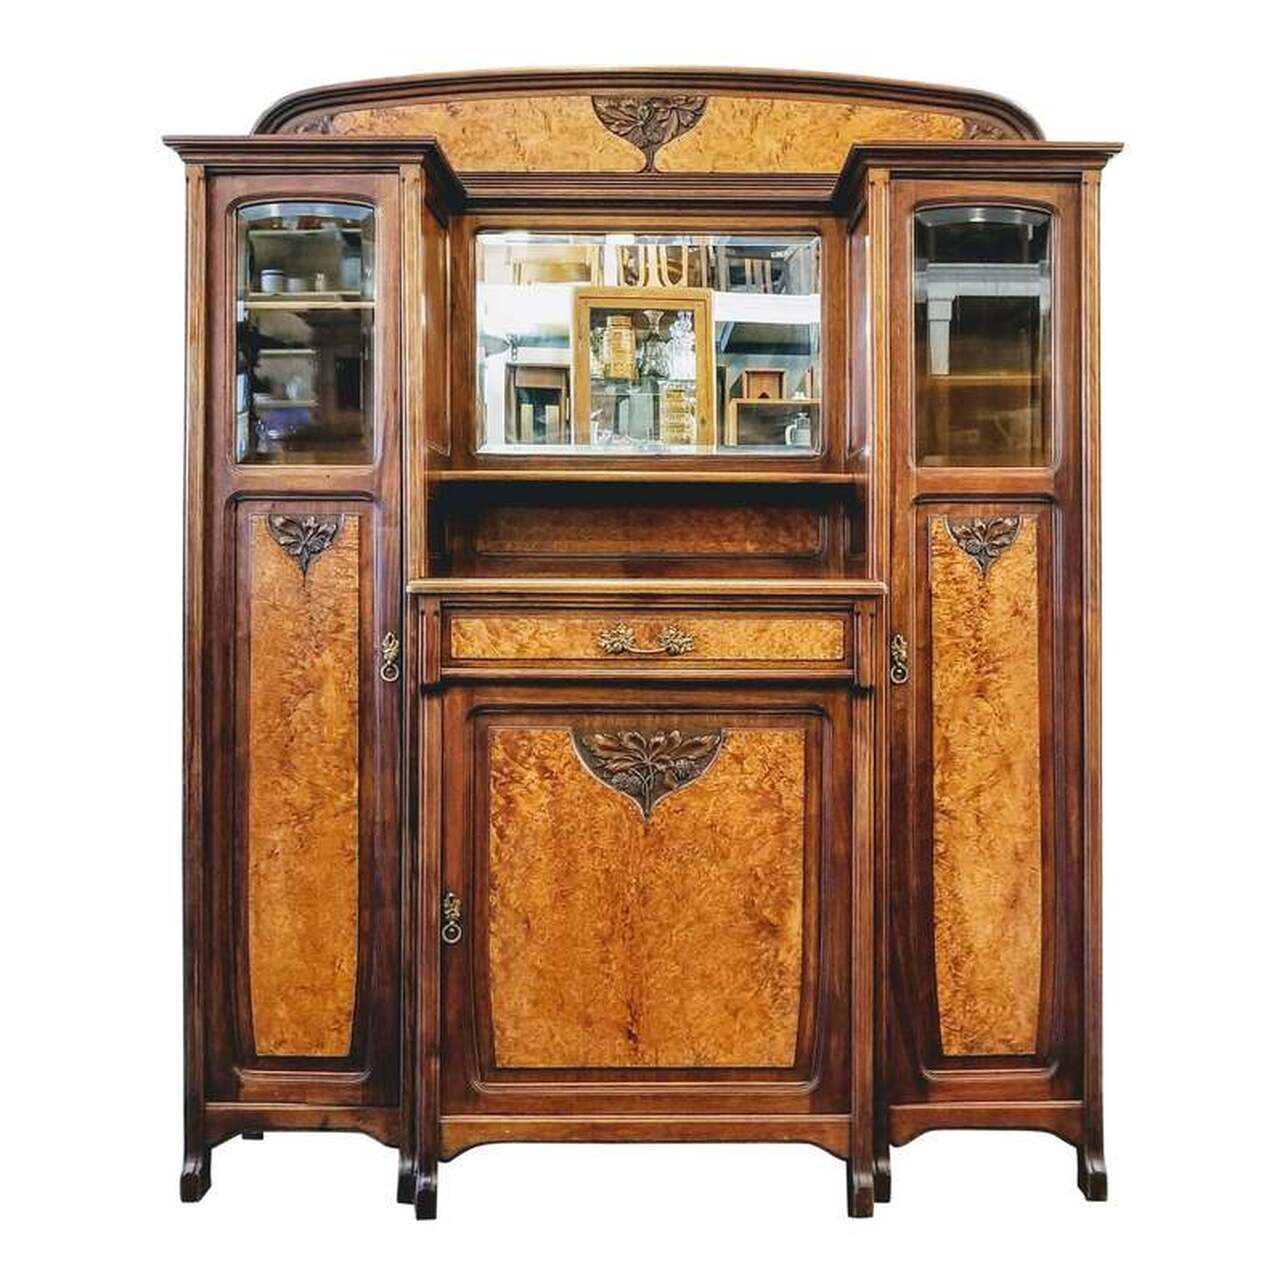 The main buffet featured here would have been designed and manufactured between about 1904 and 1906. The carcase is of the local antediluvian oak that Gauthier utilized with cupboard door fronts in a burry cut.  The pulls are in gilded bronze and designed to match the carved motifs based on natural elements, distinct clues of a Gauthier design influenced by the Nancy School.  Other features include a beveled mirror at center, beveled glass windows on each of the side doors, and adjustable shelves in the storage cabinets.